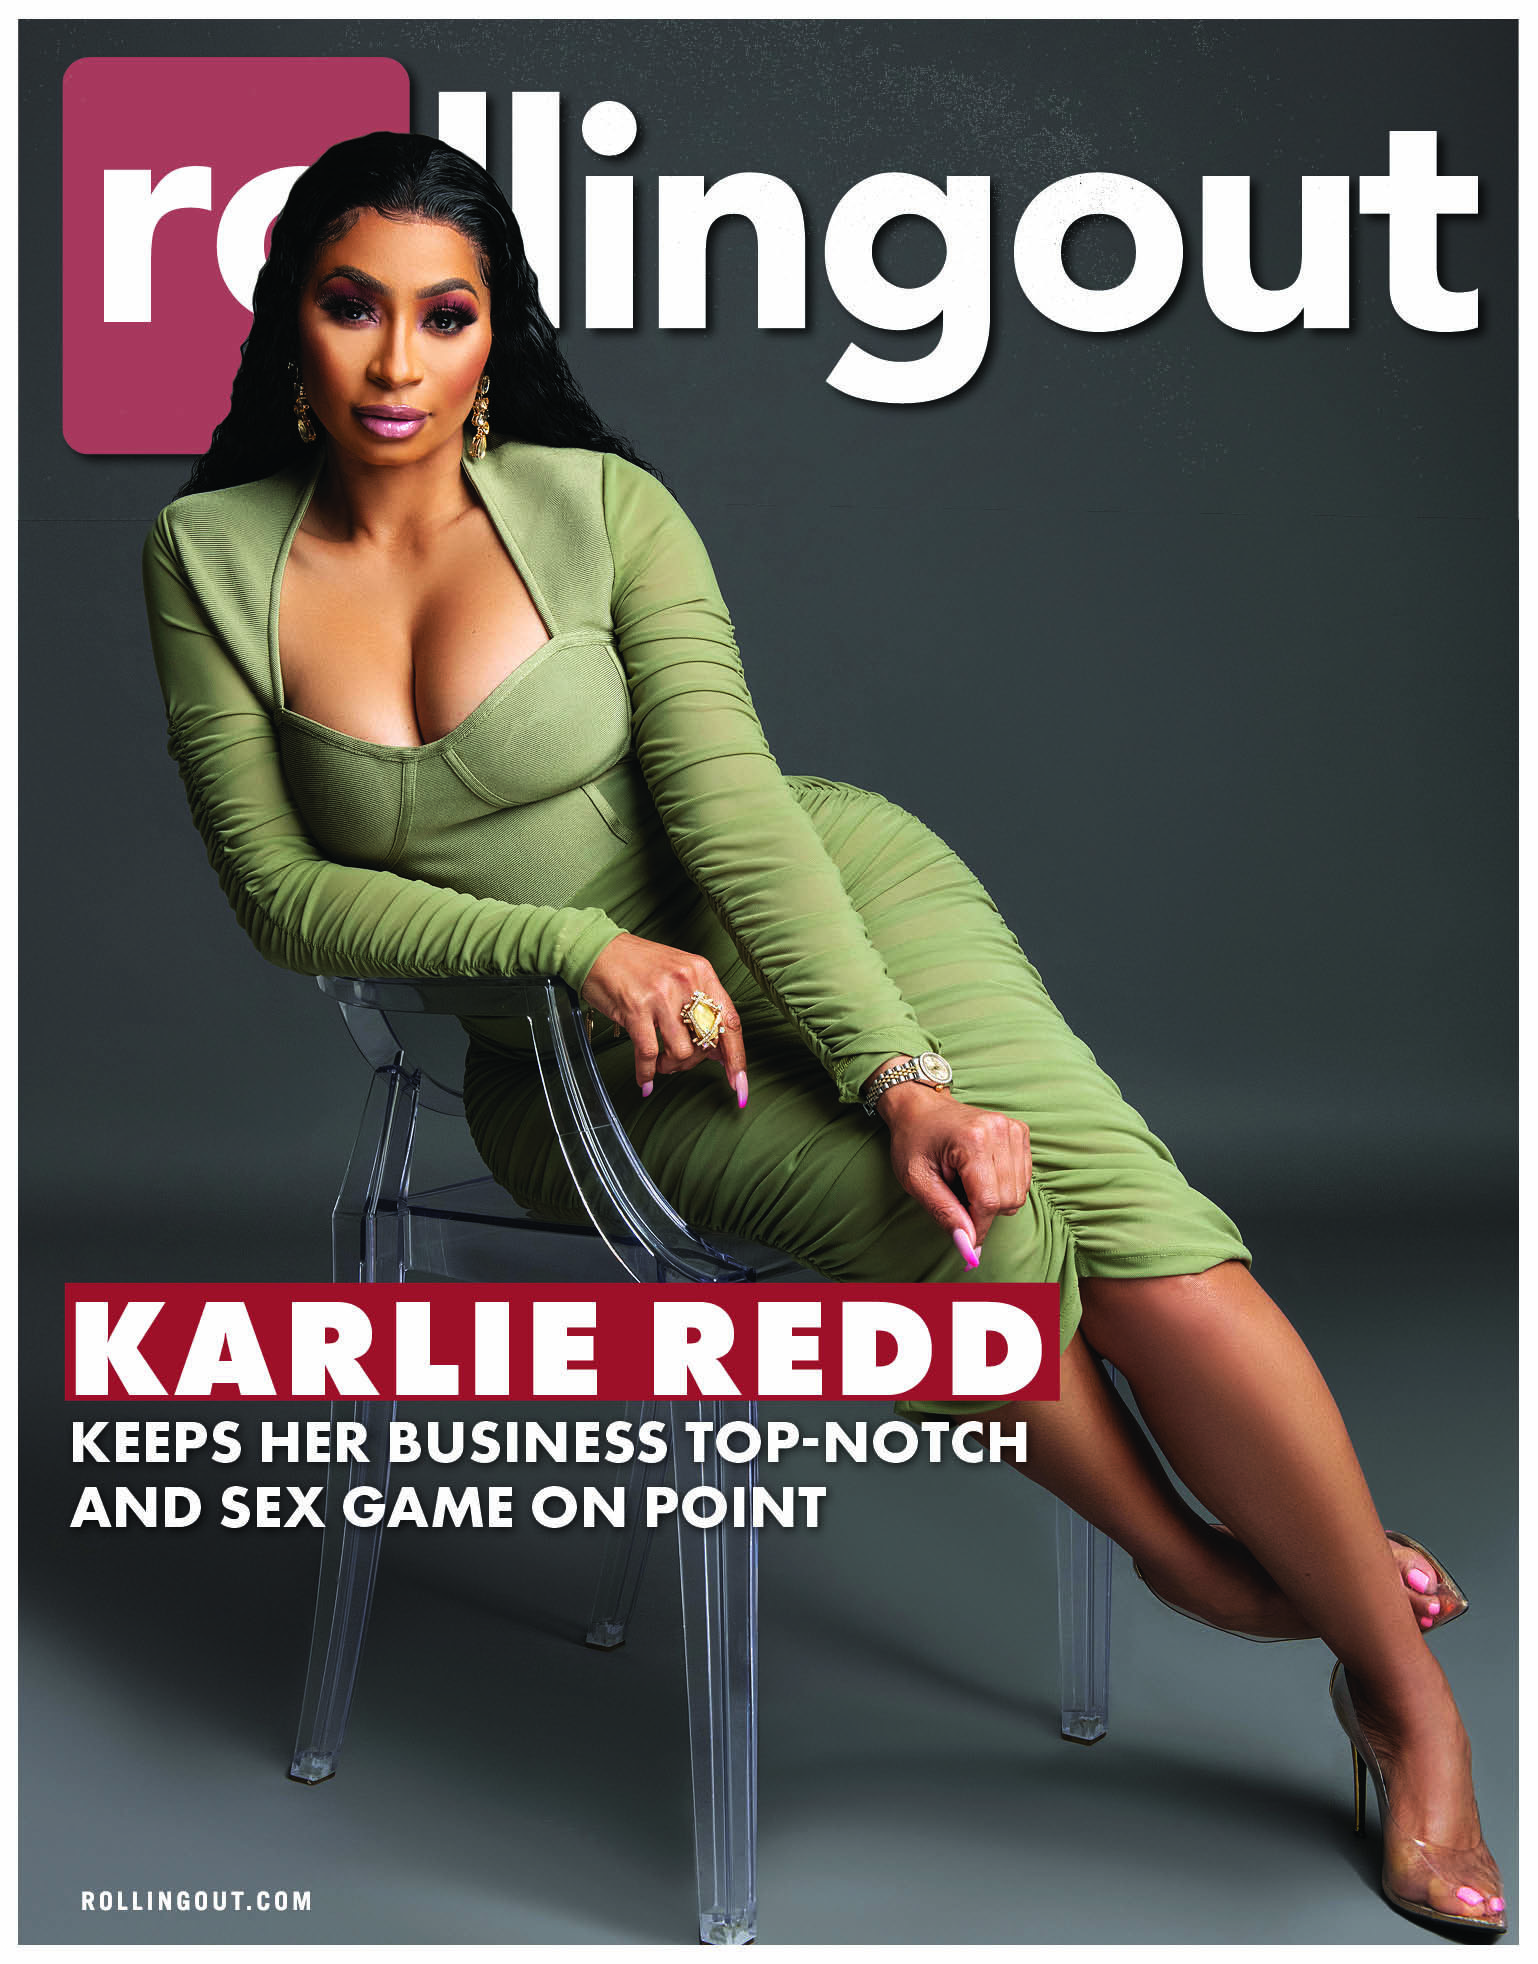 Karlie Redd keeps her business top-notch and sex game on point